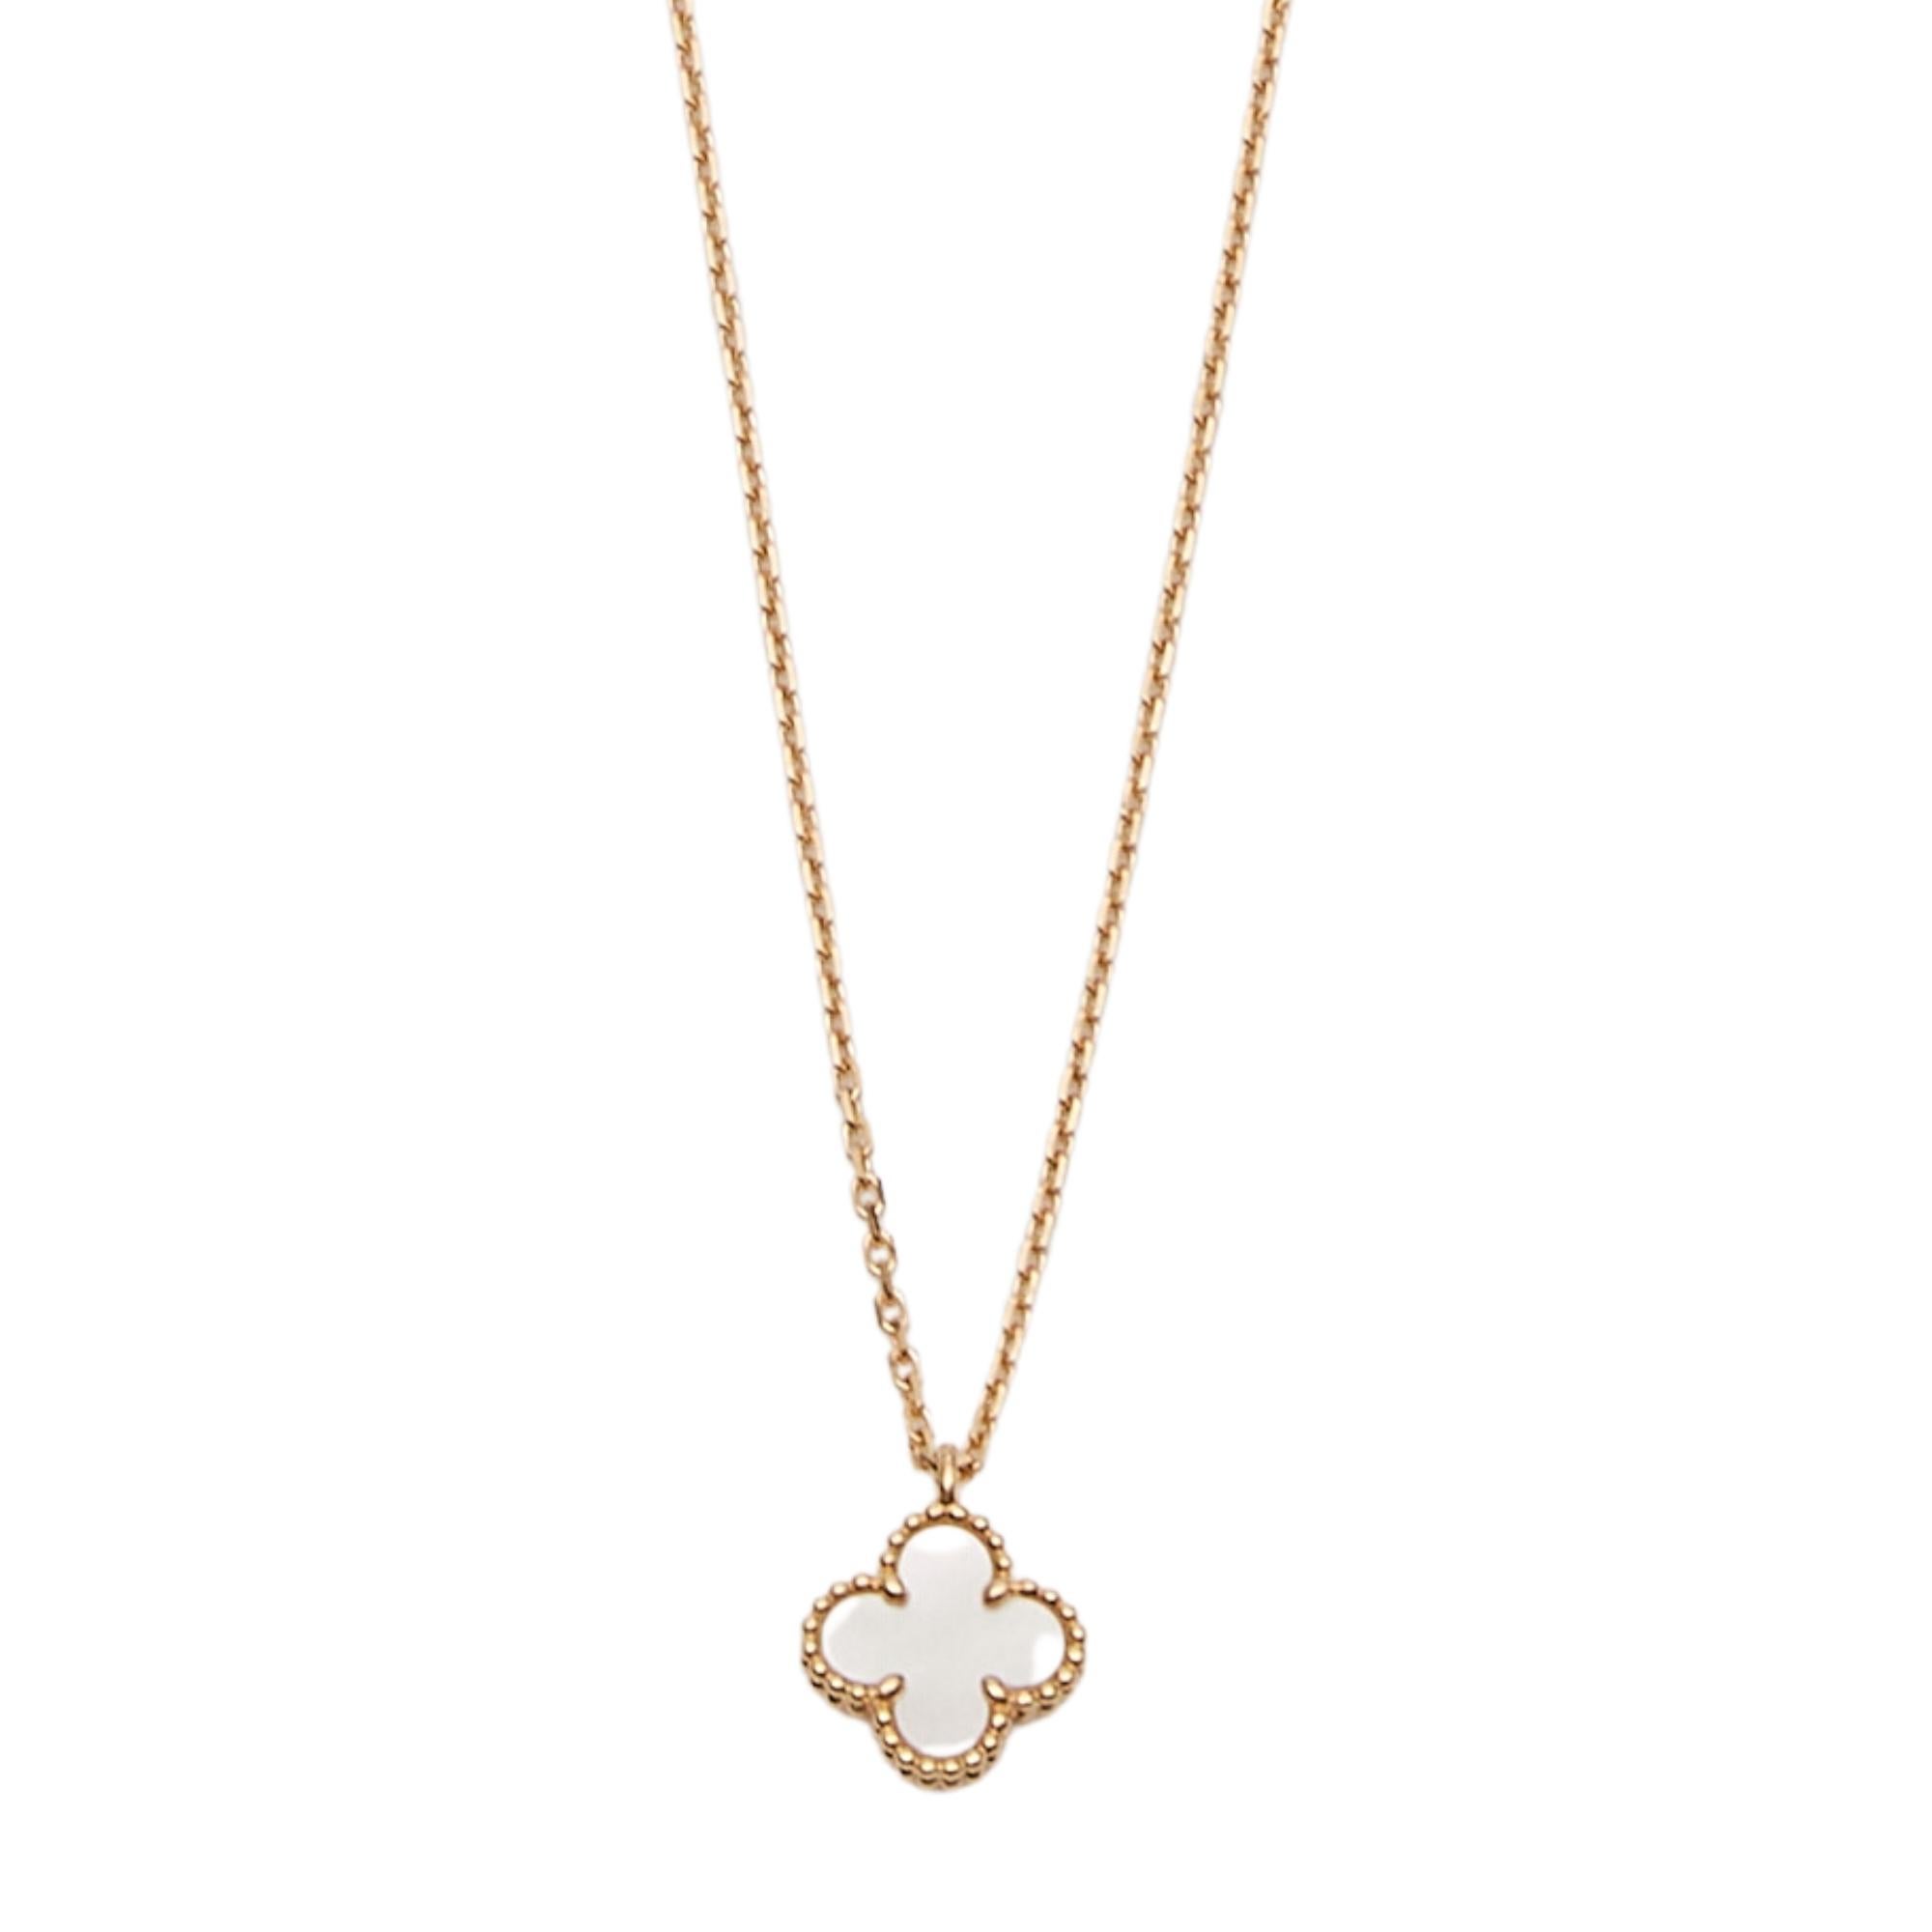 VAN CLEEF & ARPELS SWEET ALHAMBRA PENDANT GOLD MOTHER-OF-PEARL

This necklace features the mother-of-pearl pendant on a chain necklace. The mother of pearl is produced naturally in certain shells and illuminates jewelry creations with its glistening